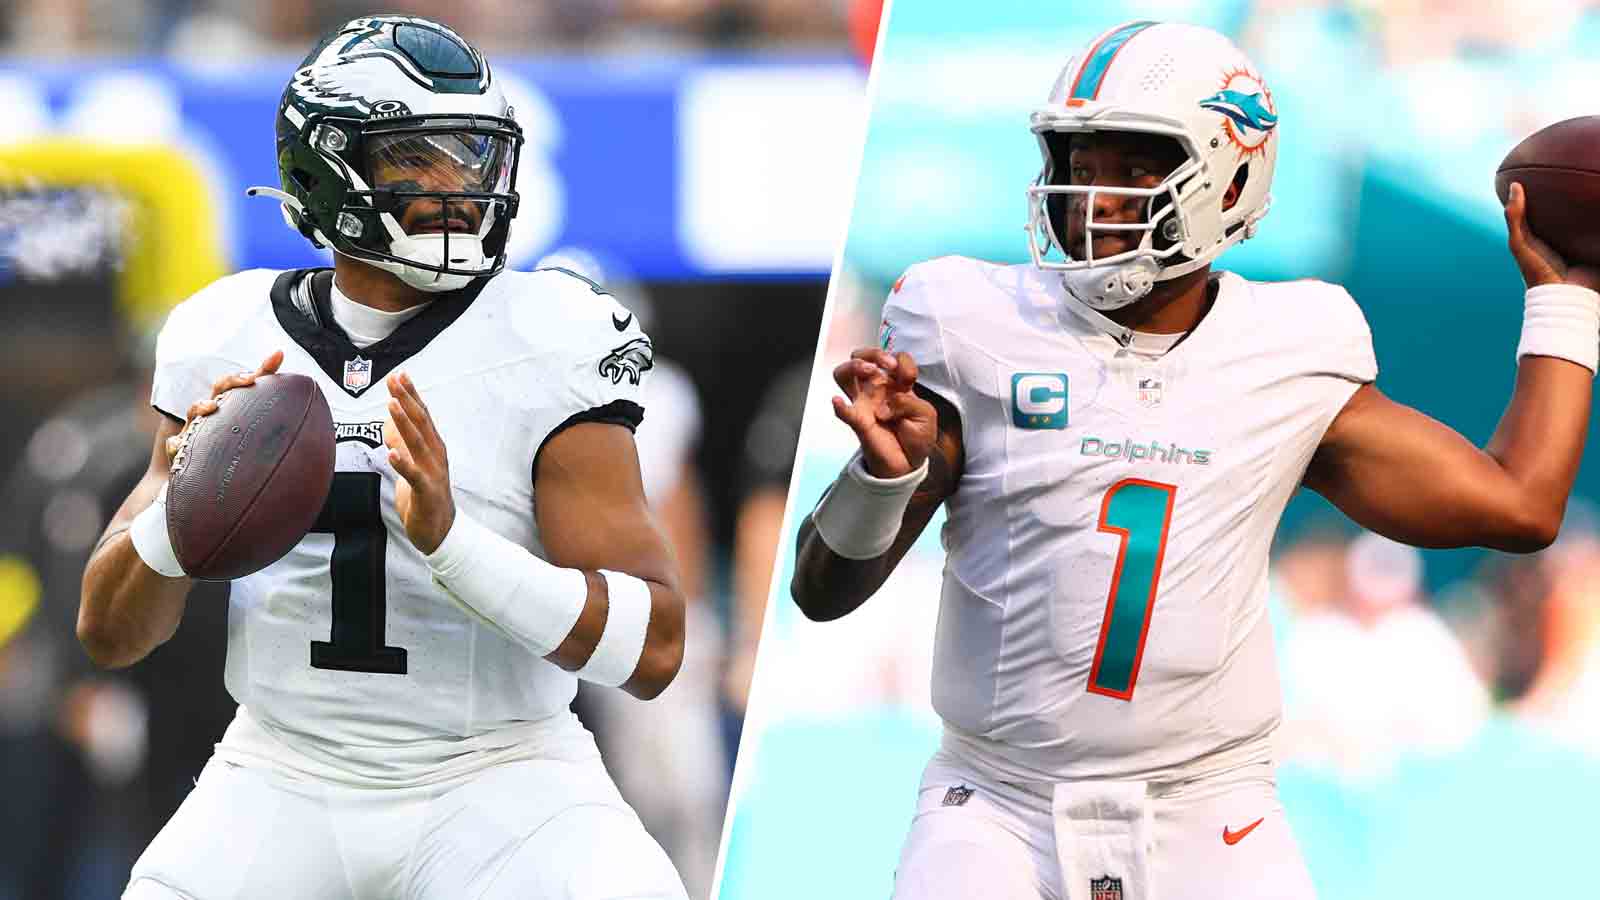 Eagles vs. Dolphins live stream: How to watch NFL Week 7 game on